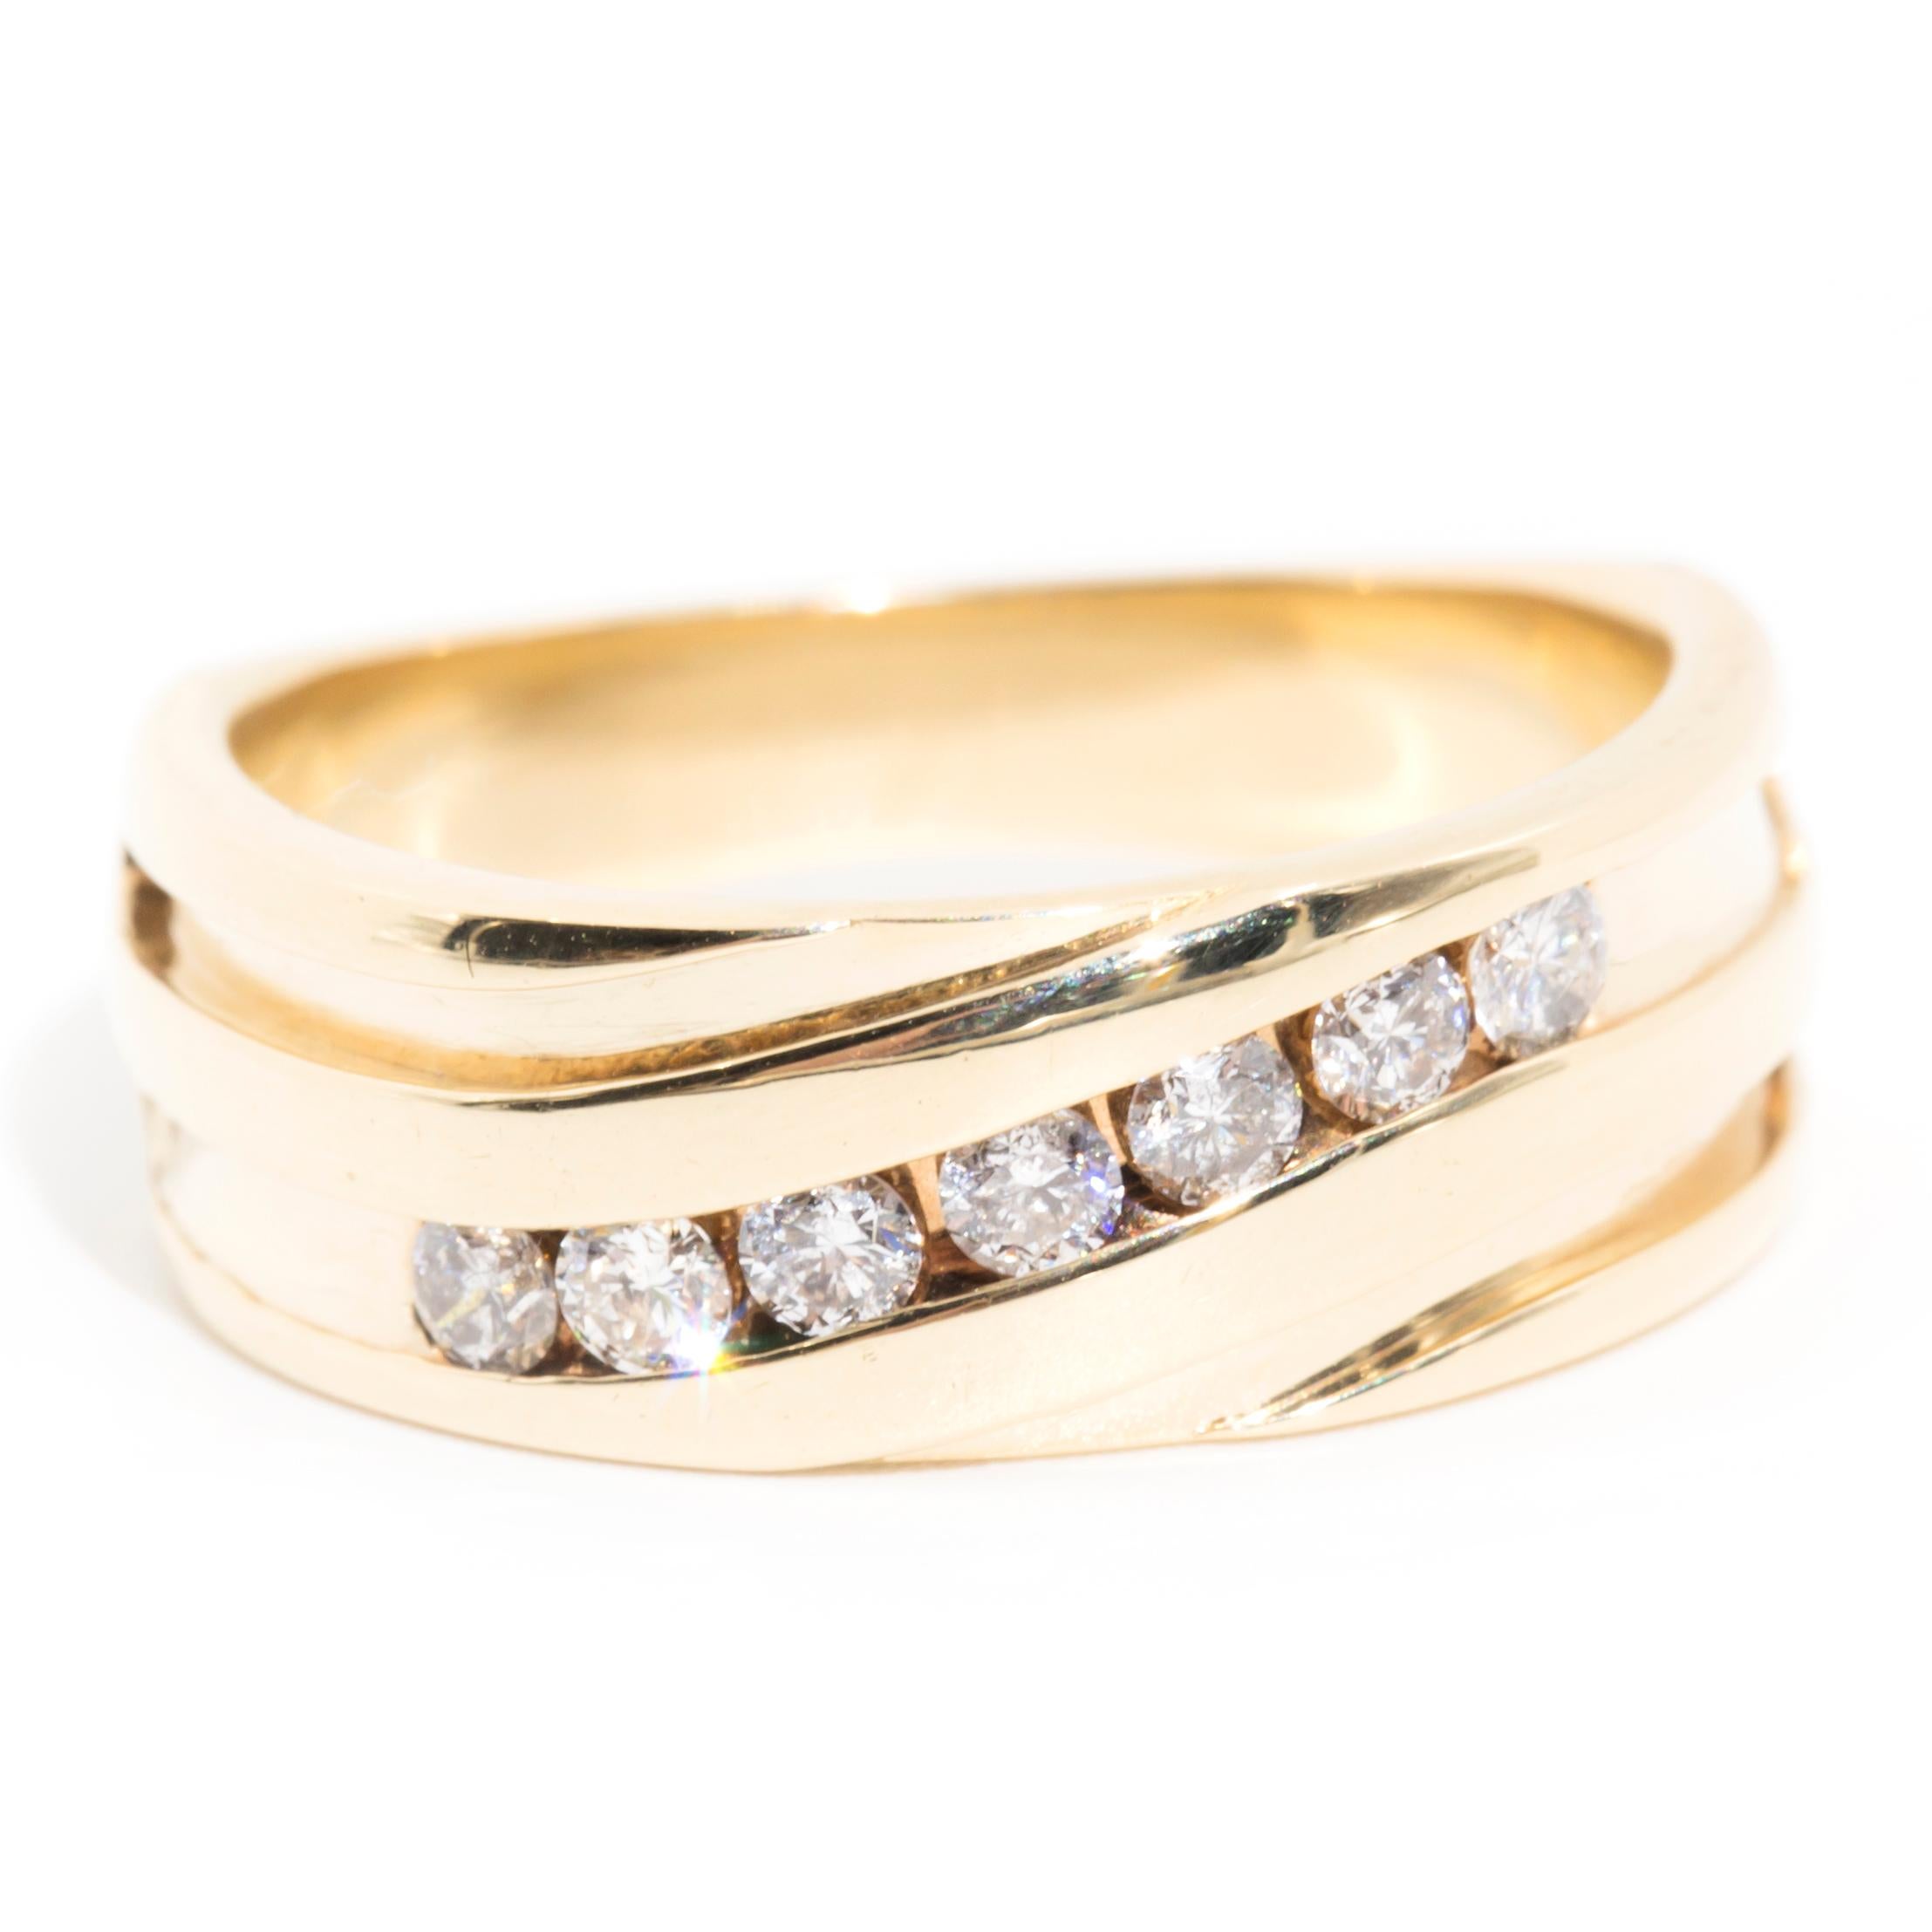 Crafted in 9 carat yellow gold, this handsome band ring features a central channel embellished with seven glittering round brilliant cut diamonds. We have named this dapper vintage piece The Gretchen Band. Her charming design lends her to be